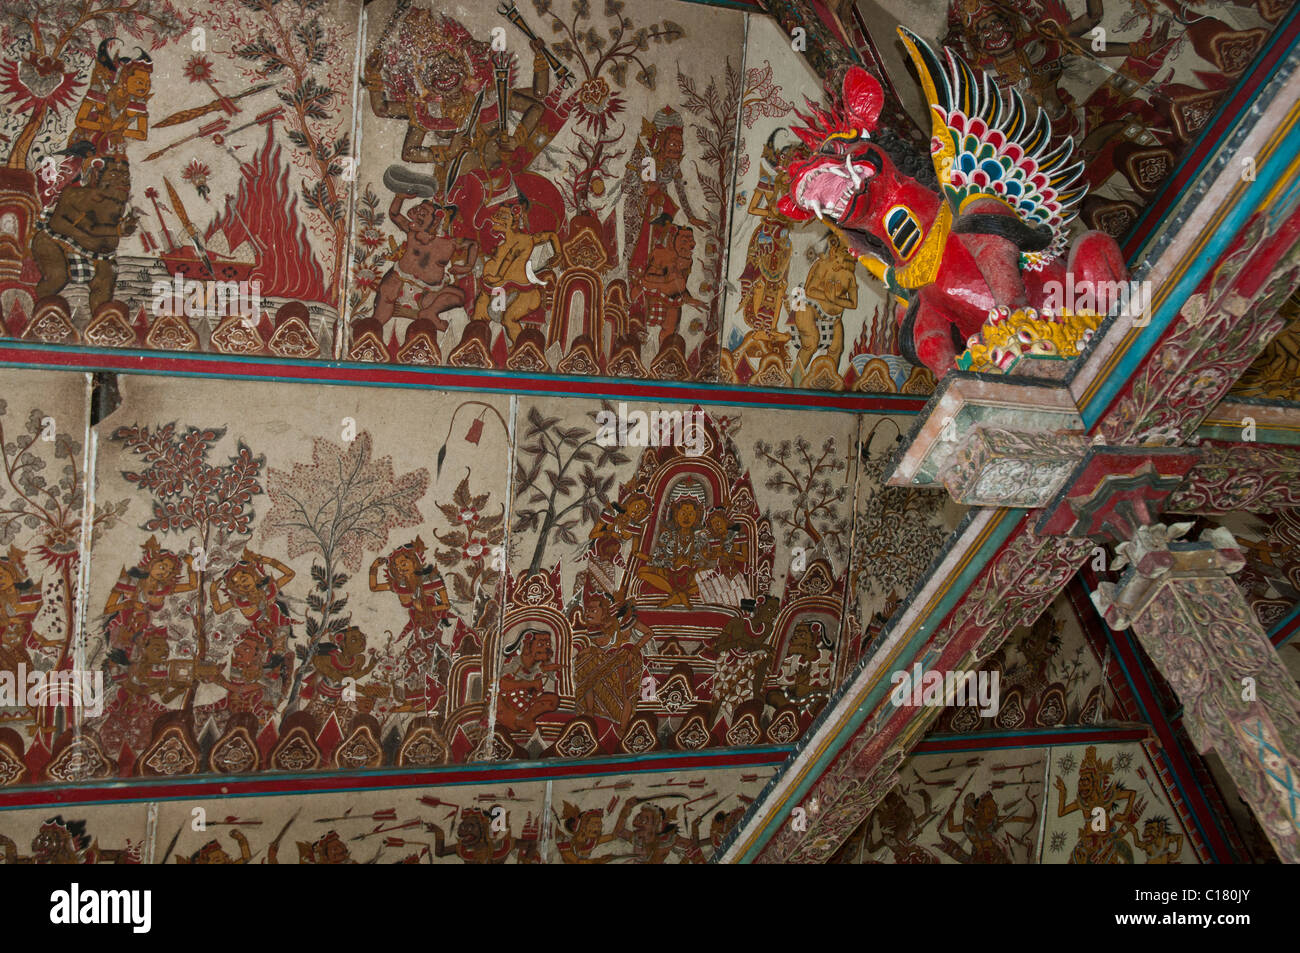 Paintings decorating the interior of the pavilions of the Hall of Justice Kertha Gosa in Klunkung in east Bali Stock Photo